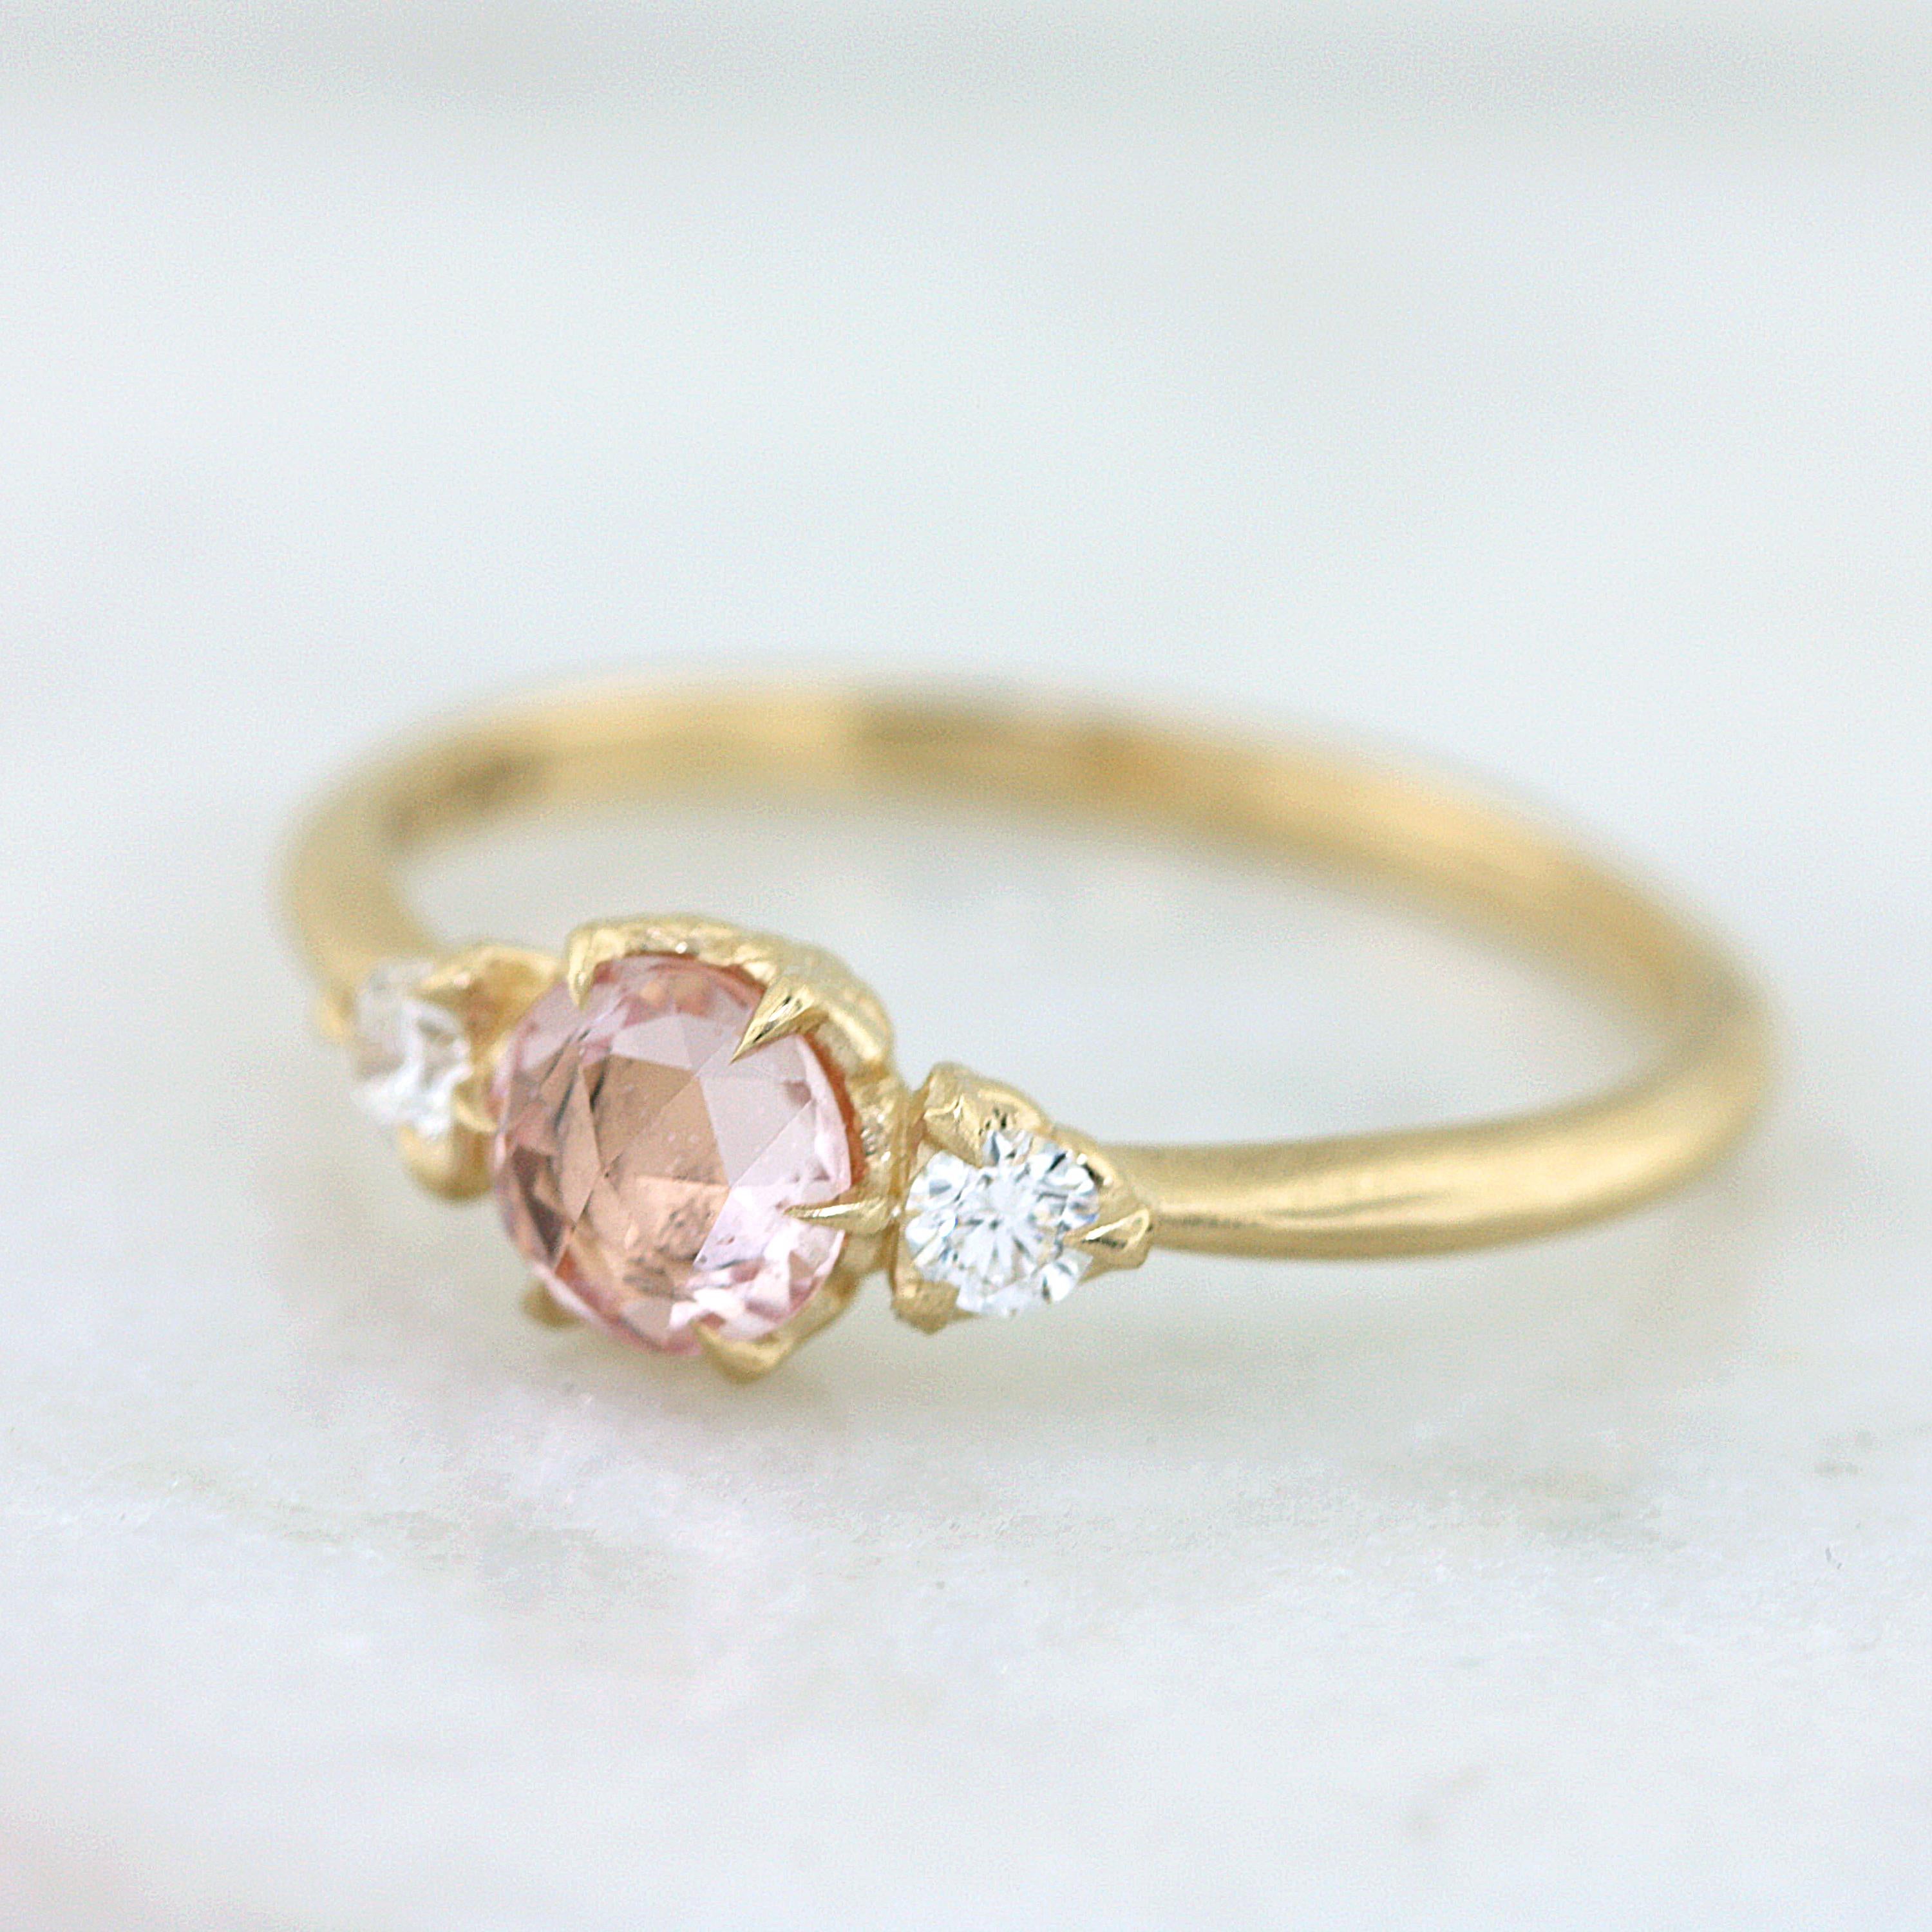 Gold leaves curl up to hold this peach .5ct rose cut sapphire, with accent Canadian diamonds. The glow and sheen on this ring is beautifully understated. Set in 14K 100% recycled gold.

- Finger size 6.25
- Available for customization
- Appraisals